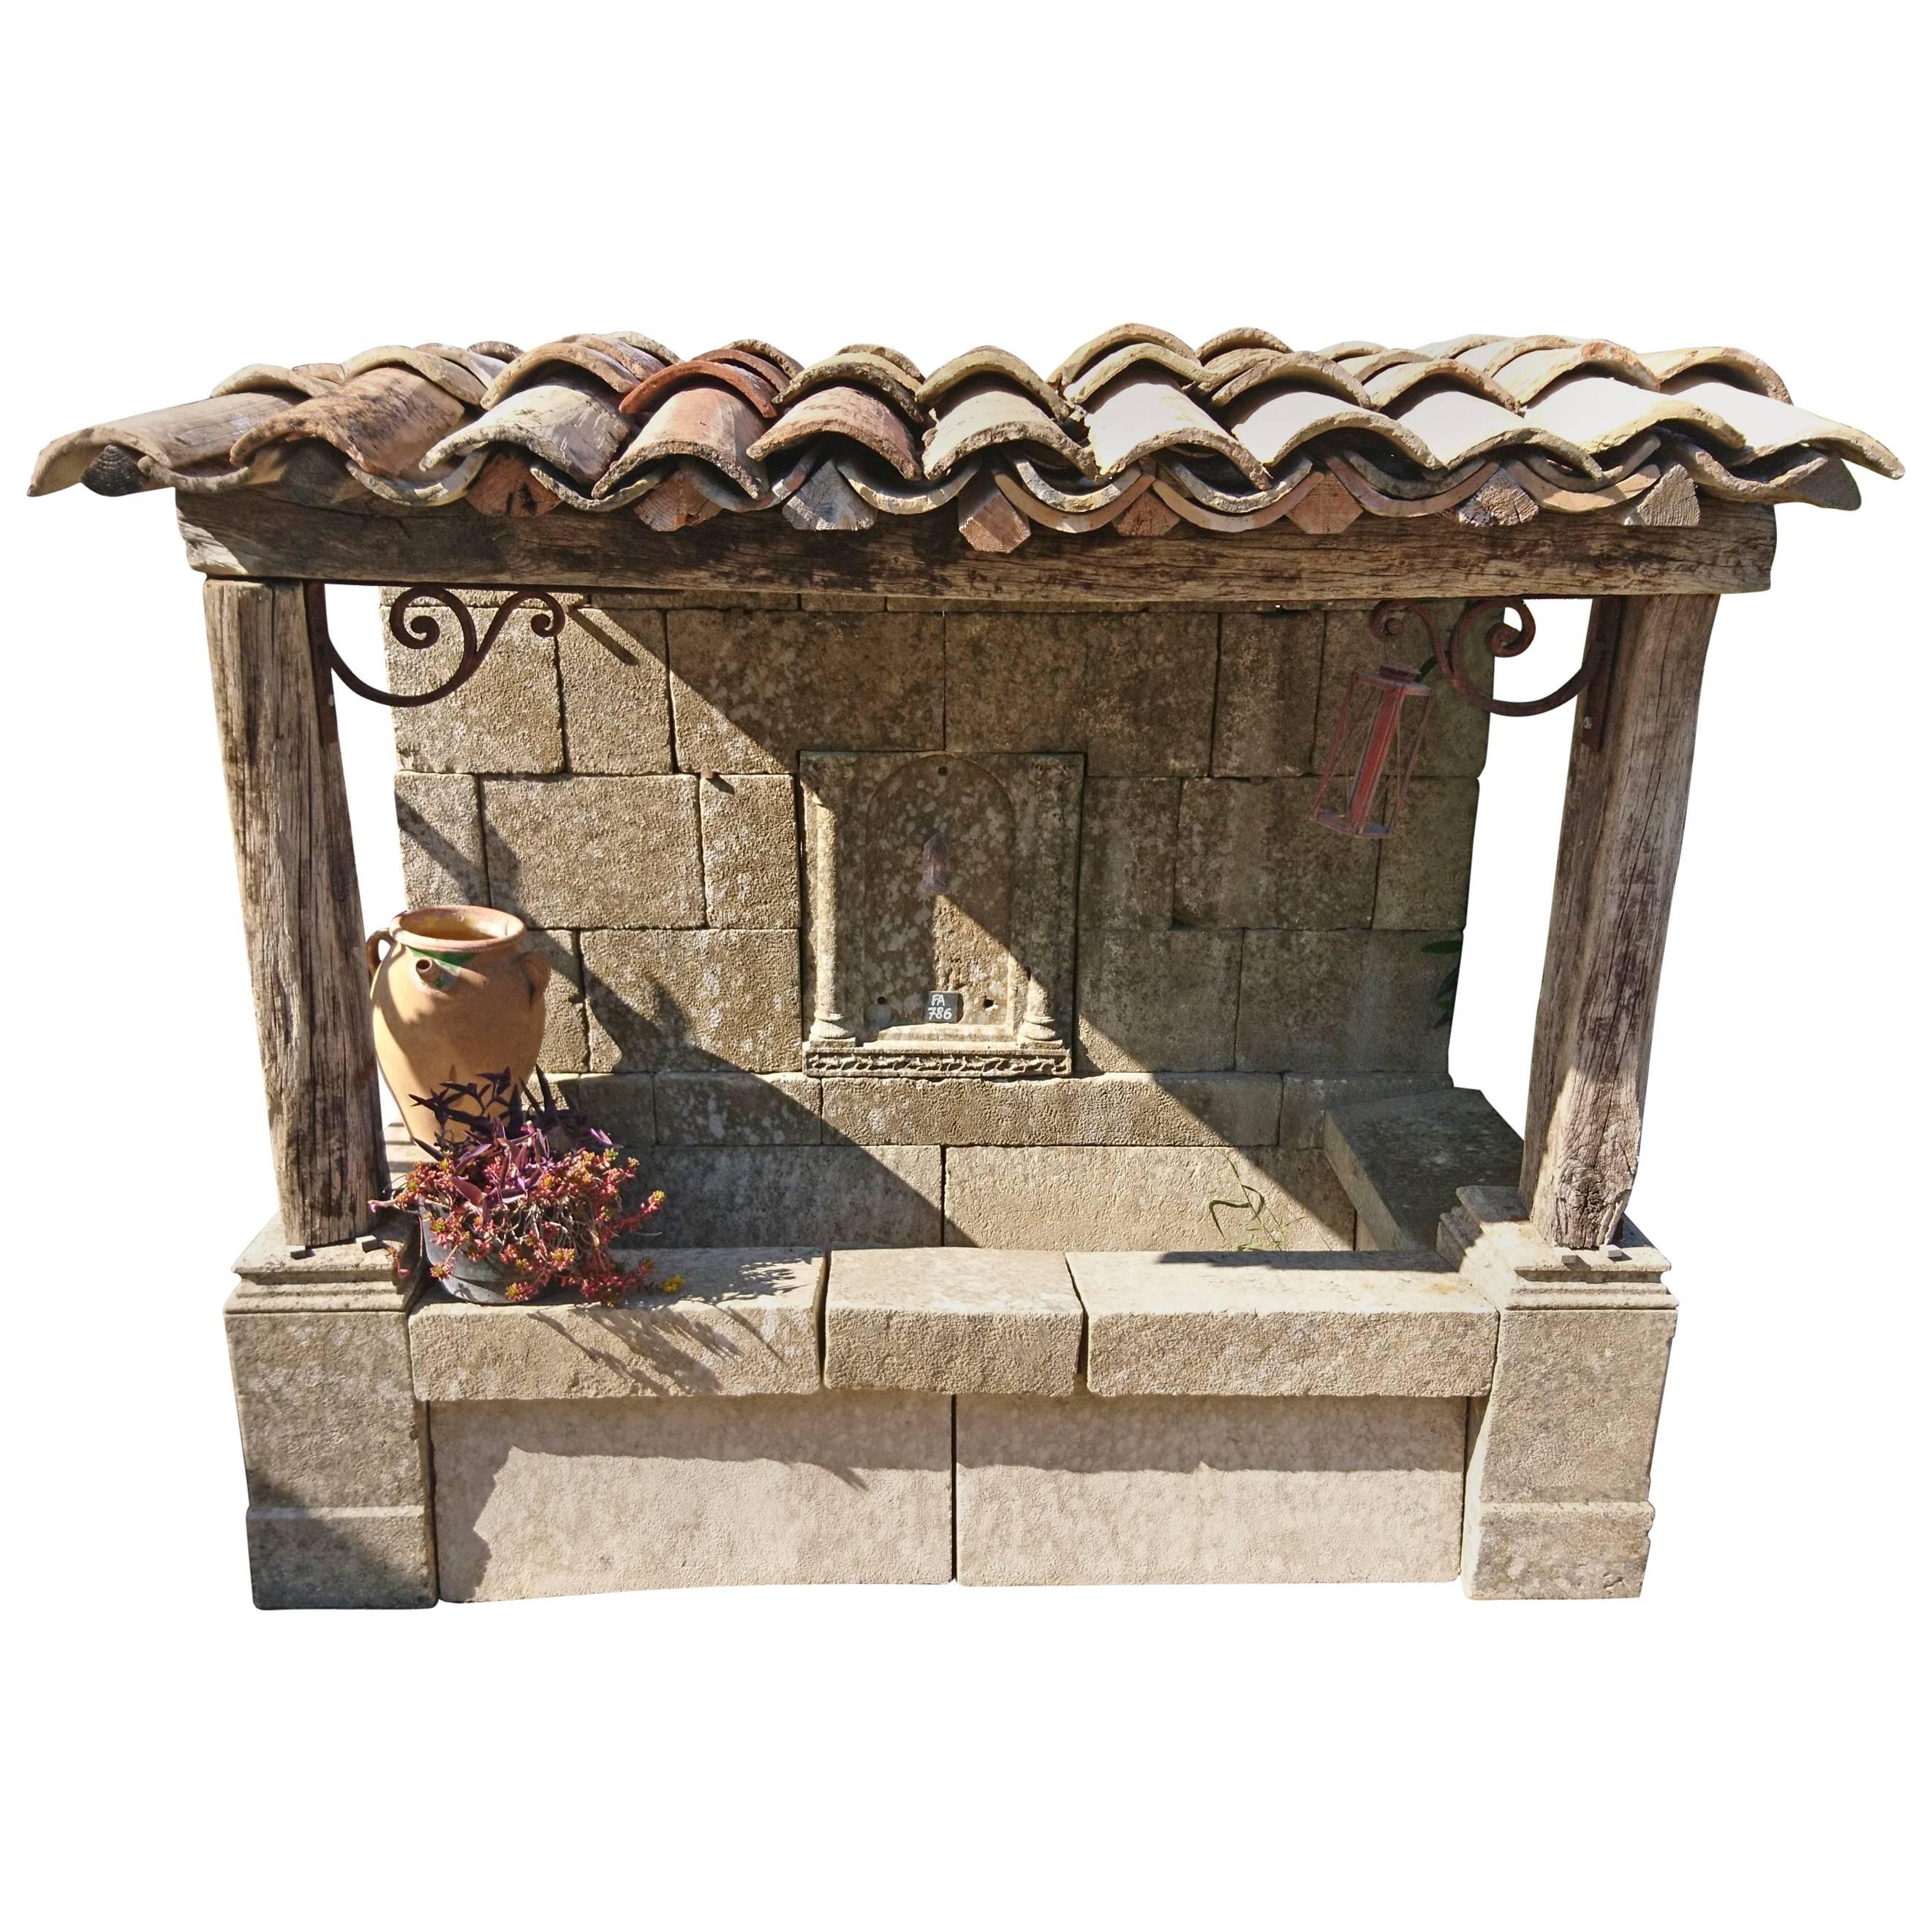 Large Wall-Fountain with Stone Basin, Roof with Wooden Beams and Provence Tiles For Sale